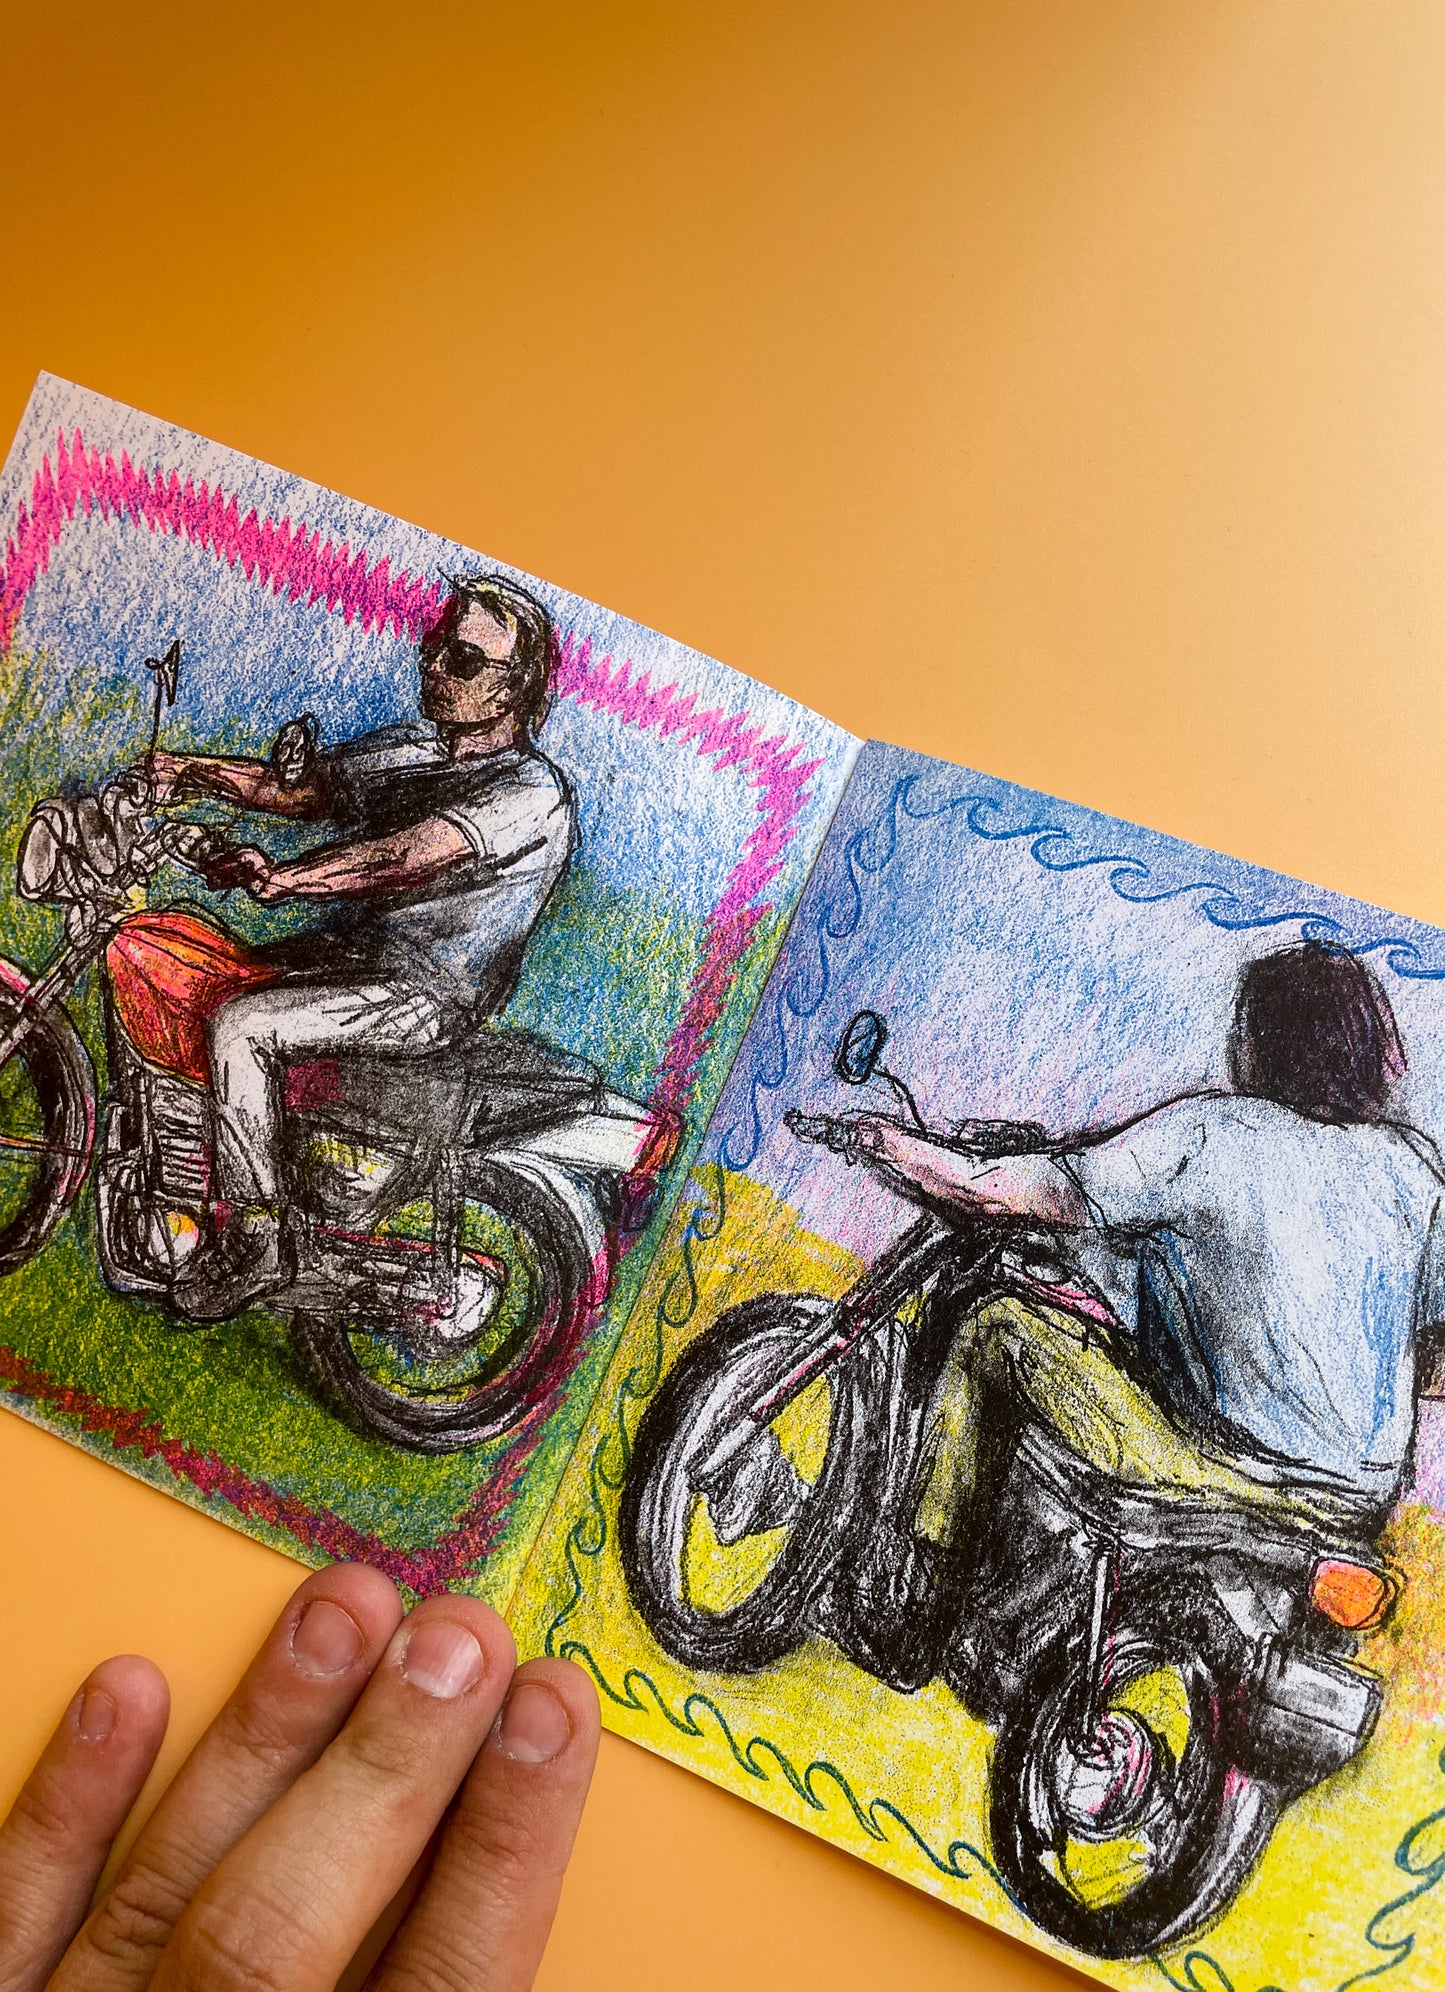 'My Crushes on Their Motorcycles' Risograph Zine